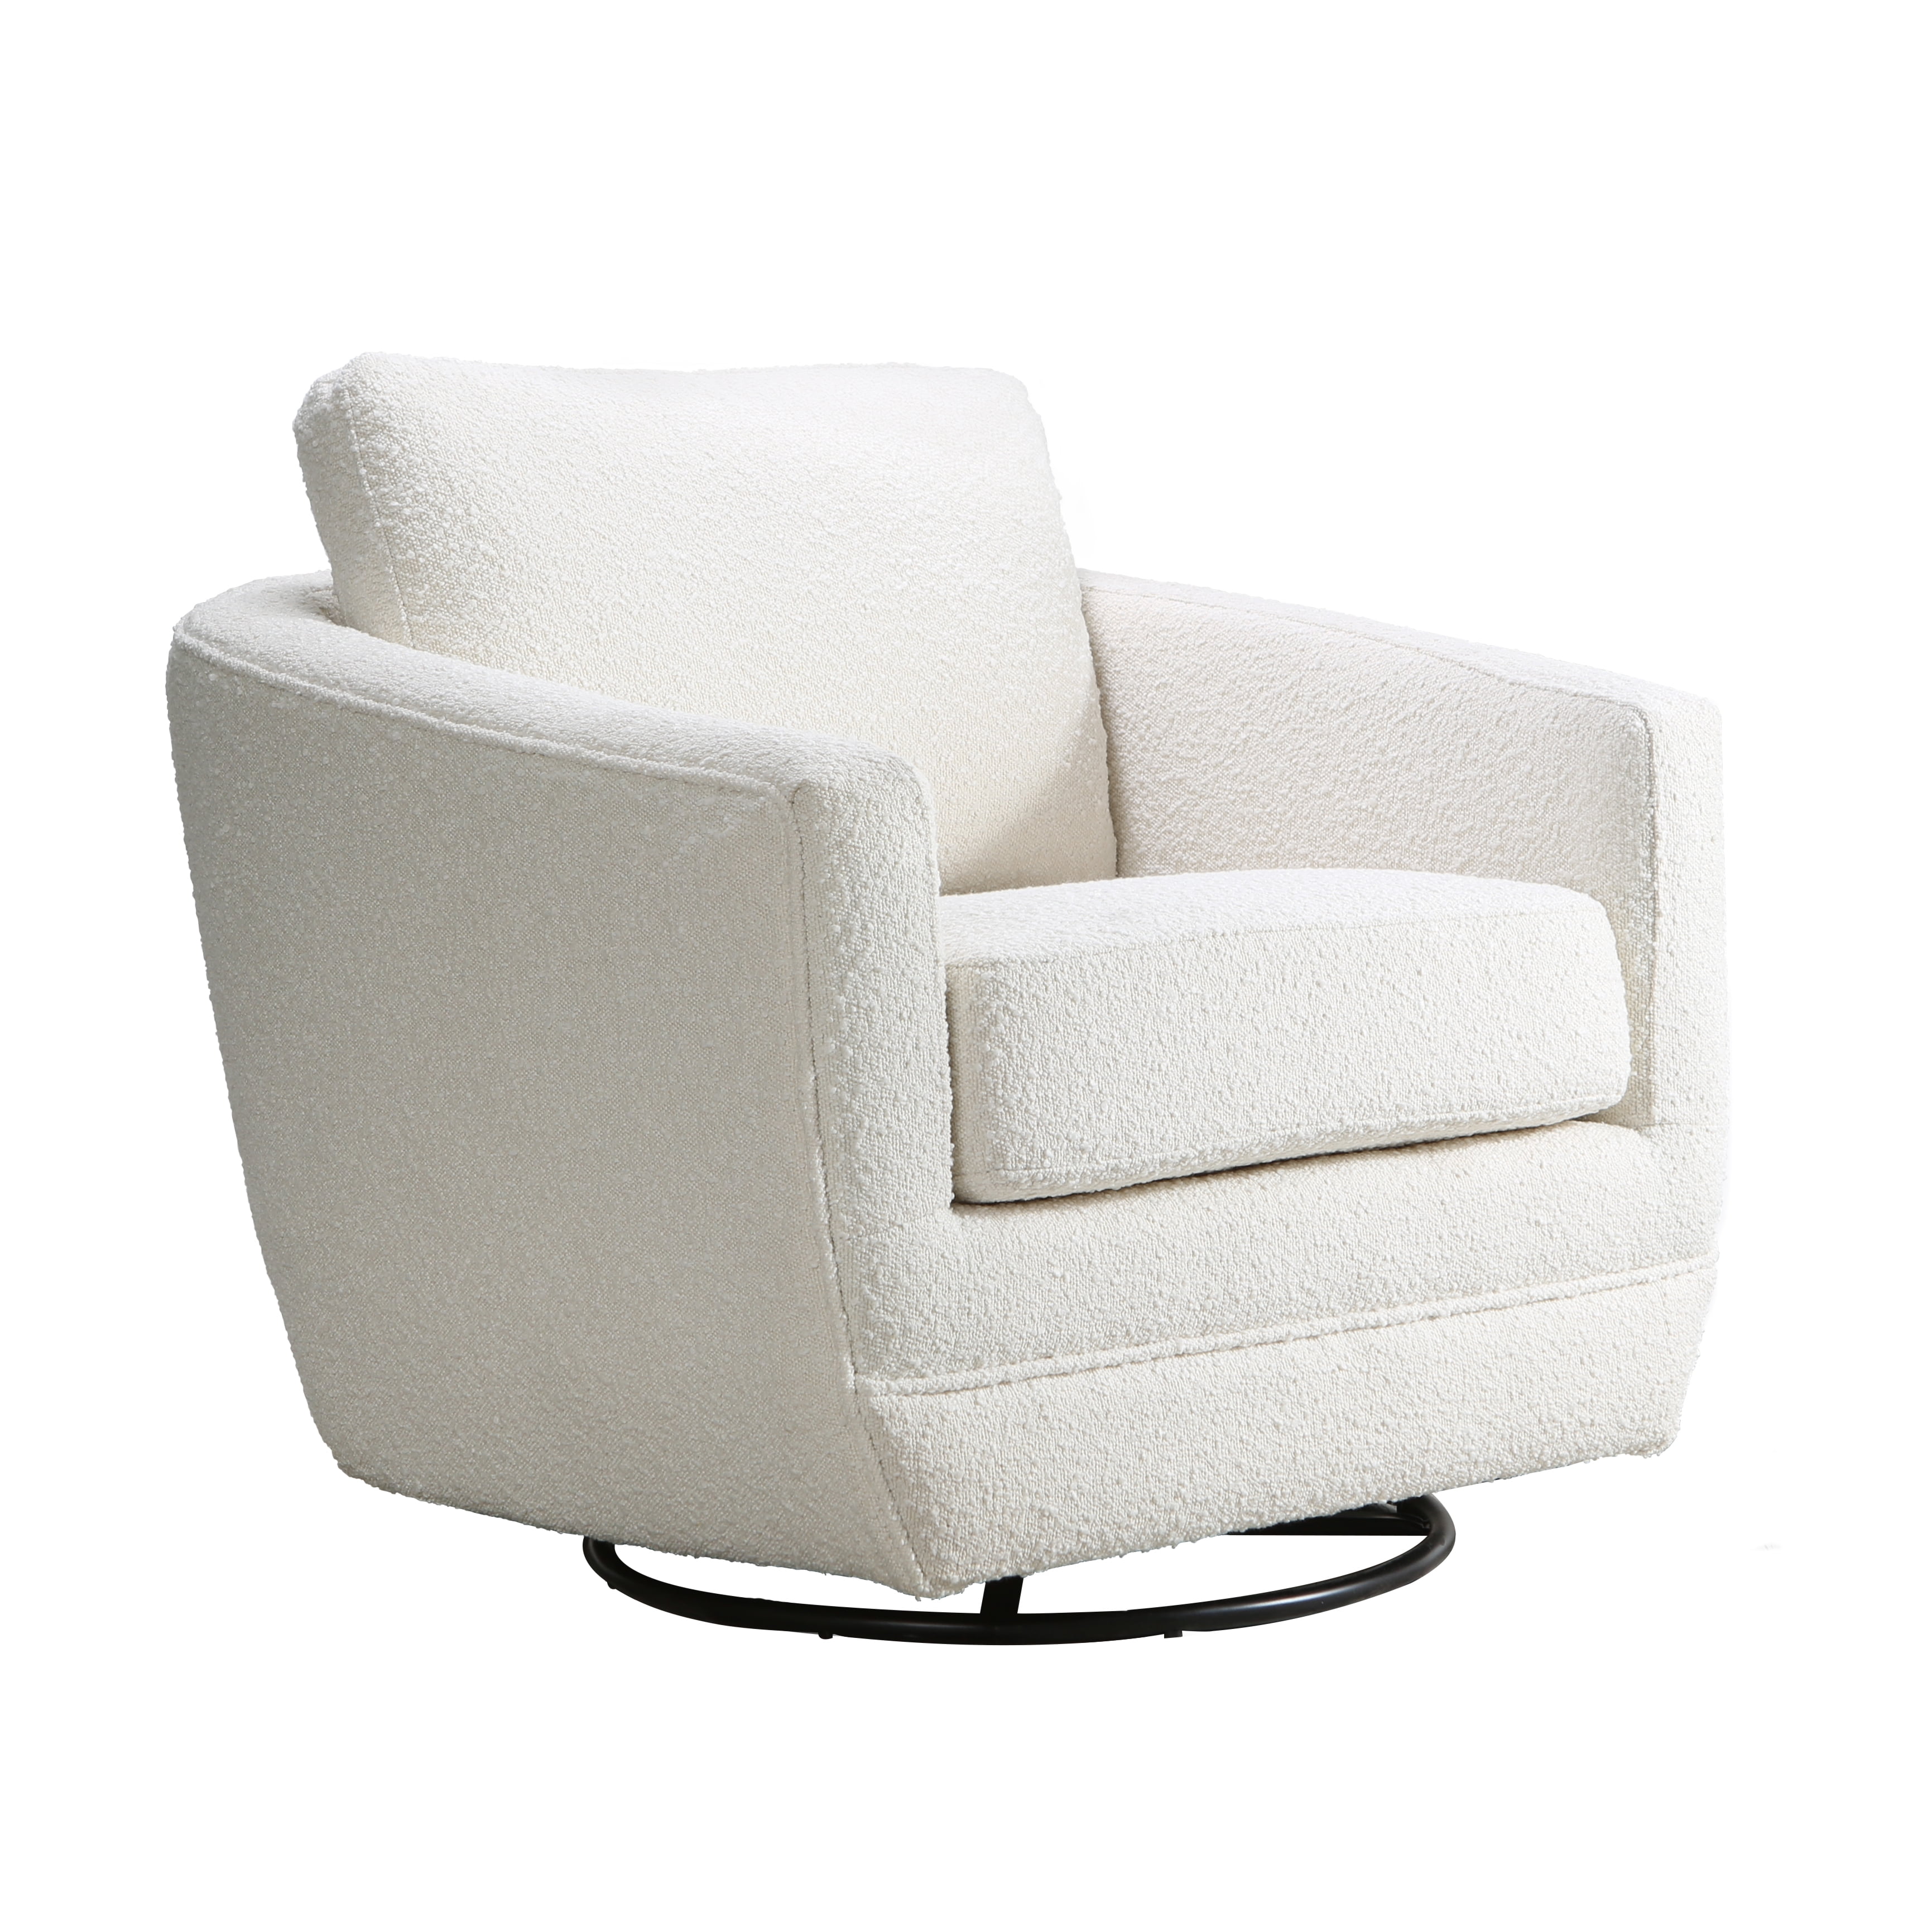 Second Story Home Gogh Upholstered Swivel Glider